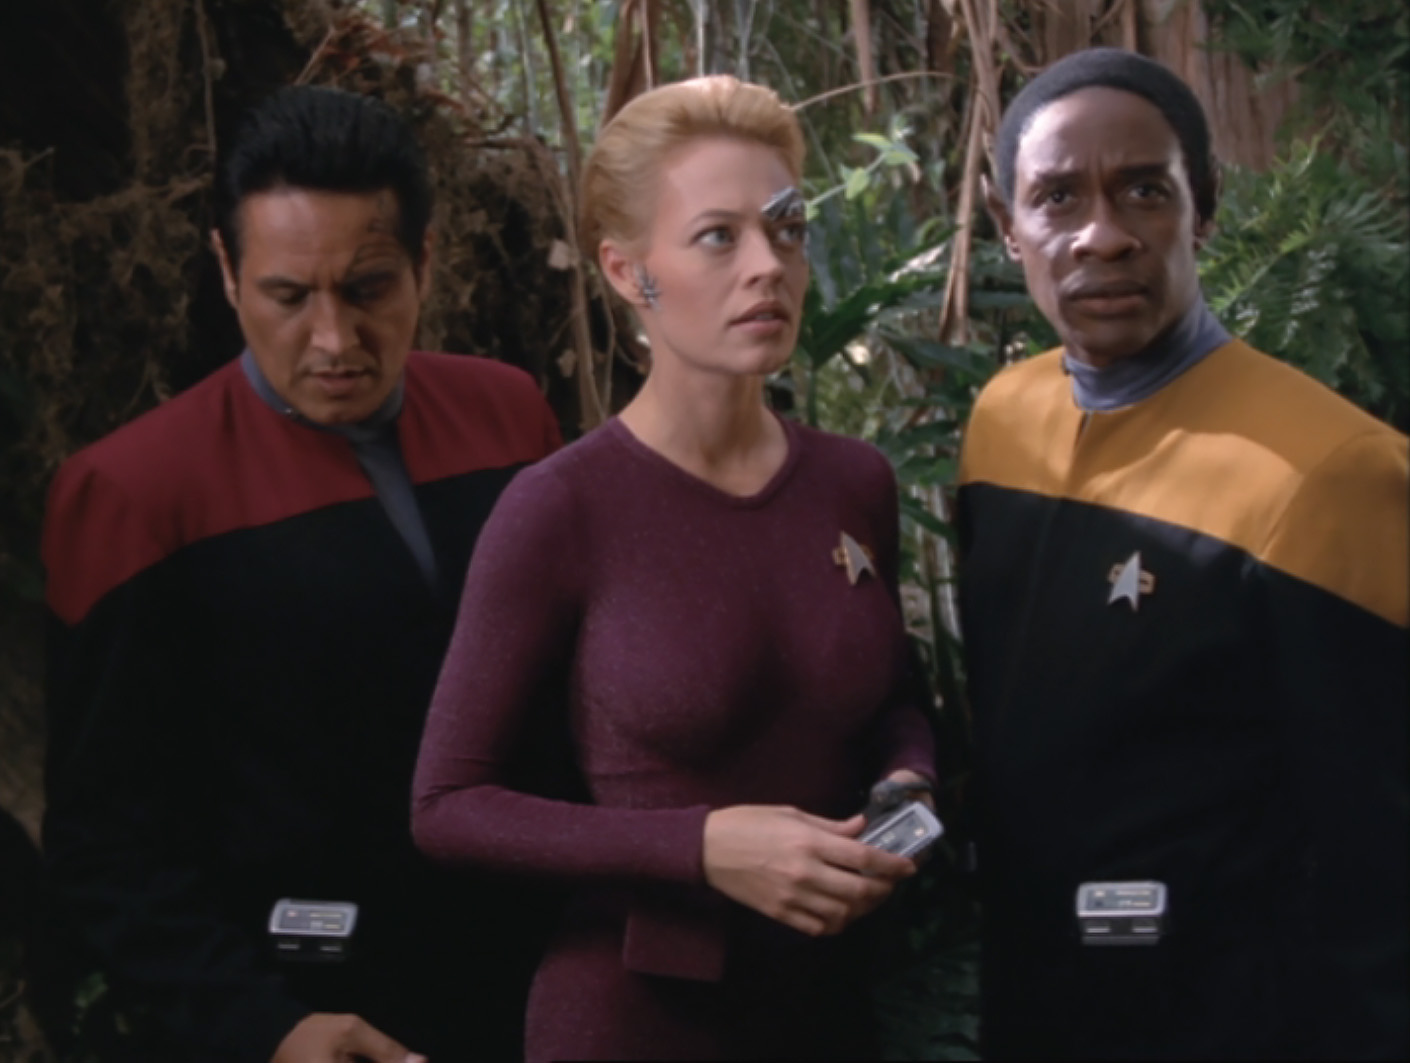 when did 7 join voyager